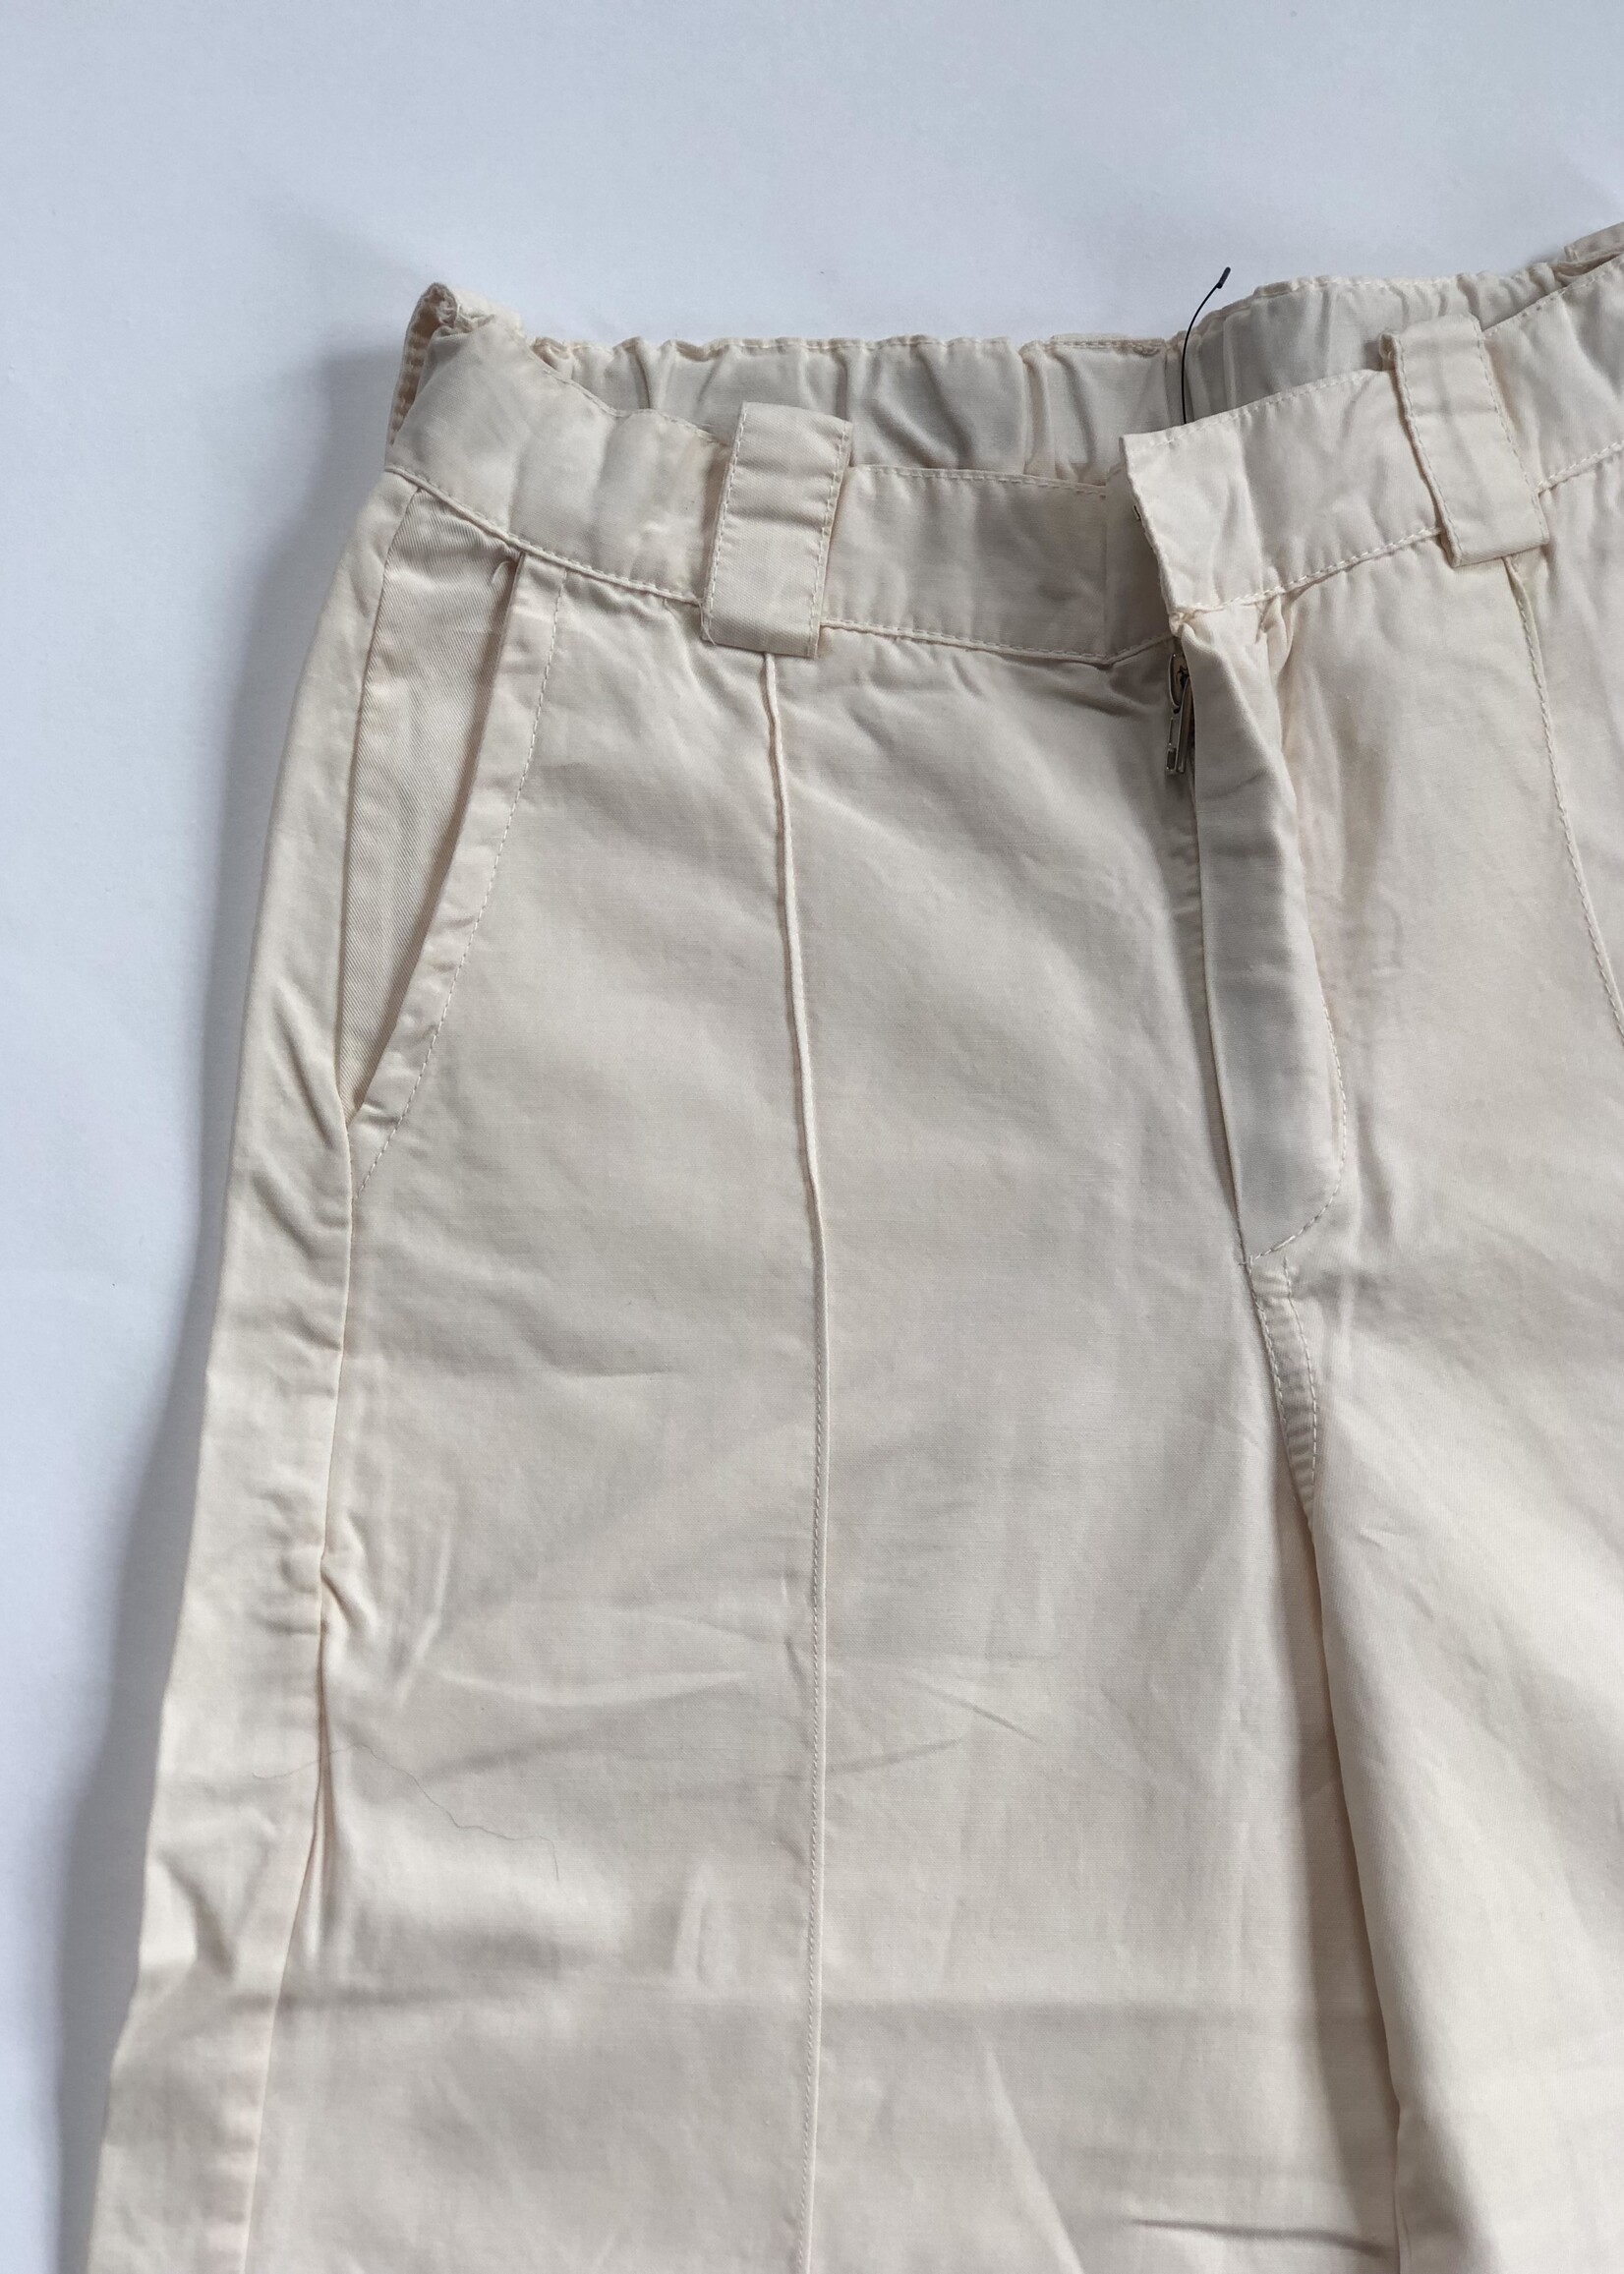 Long Live The Queen Creme wide fit summer pants 4y